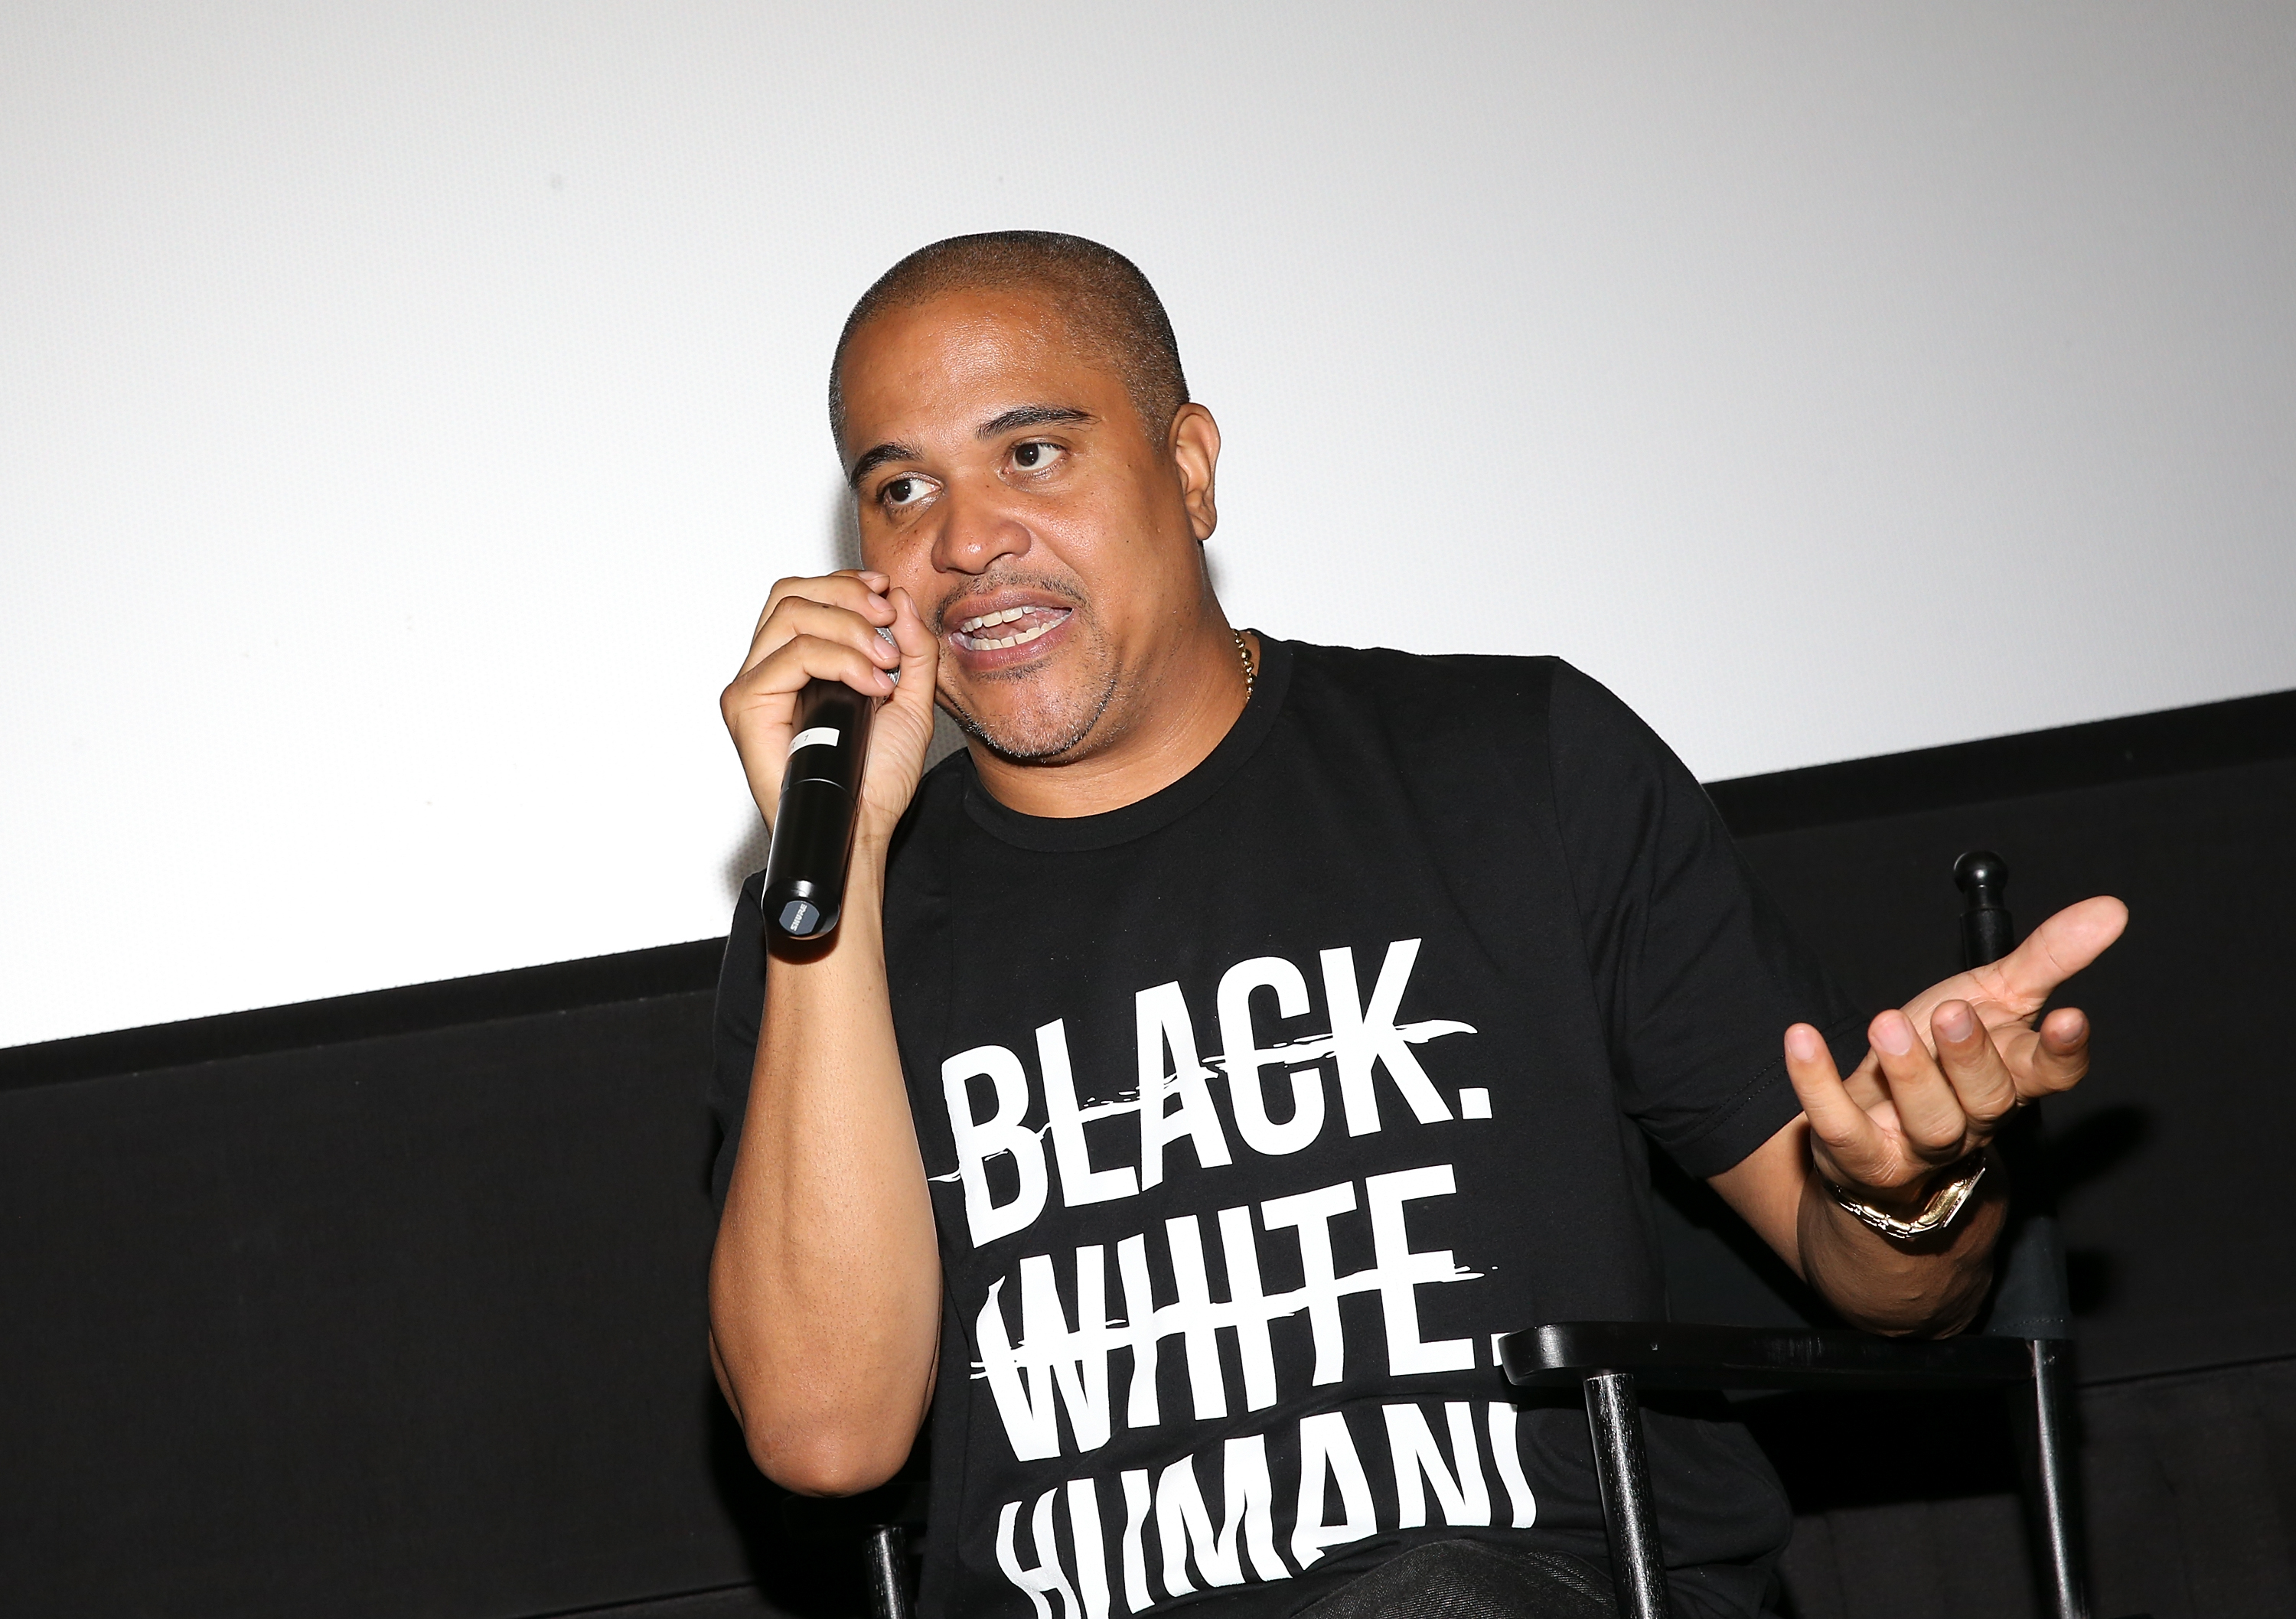 Irv Gotti Feels The NFL Made JAY-Z "Look Like A Pawn"